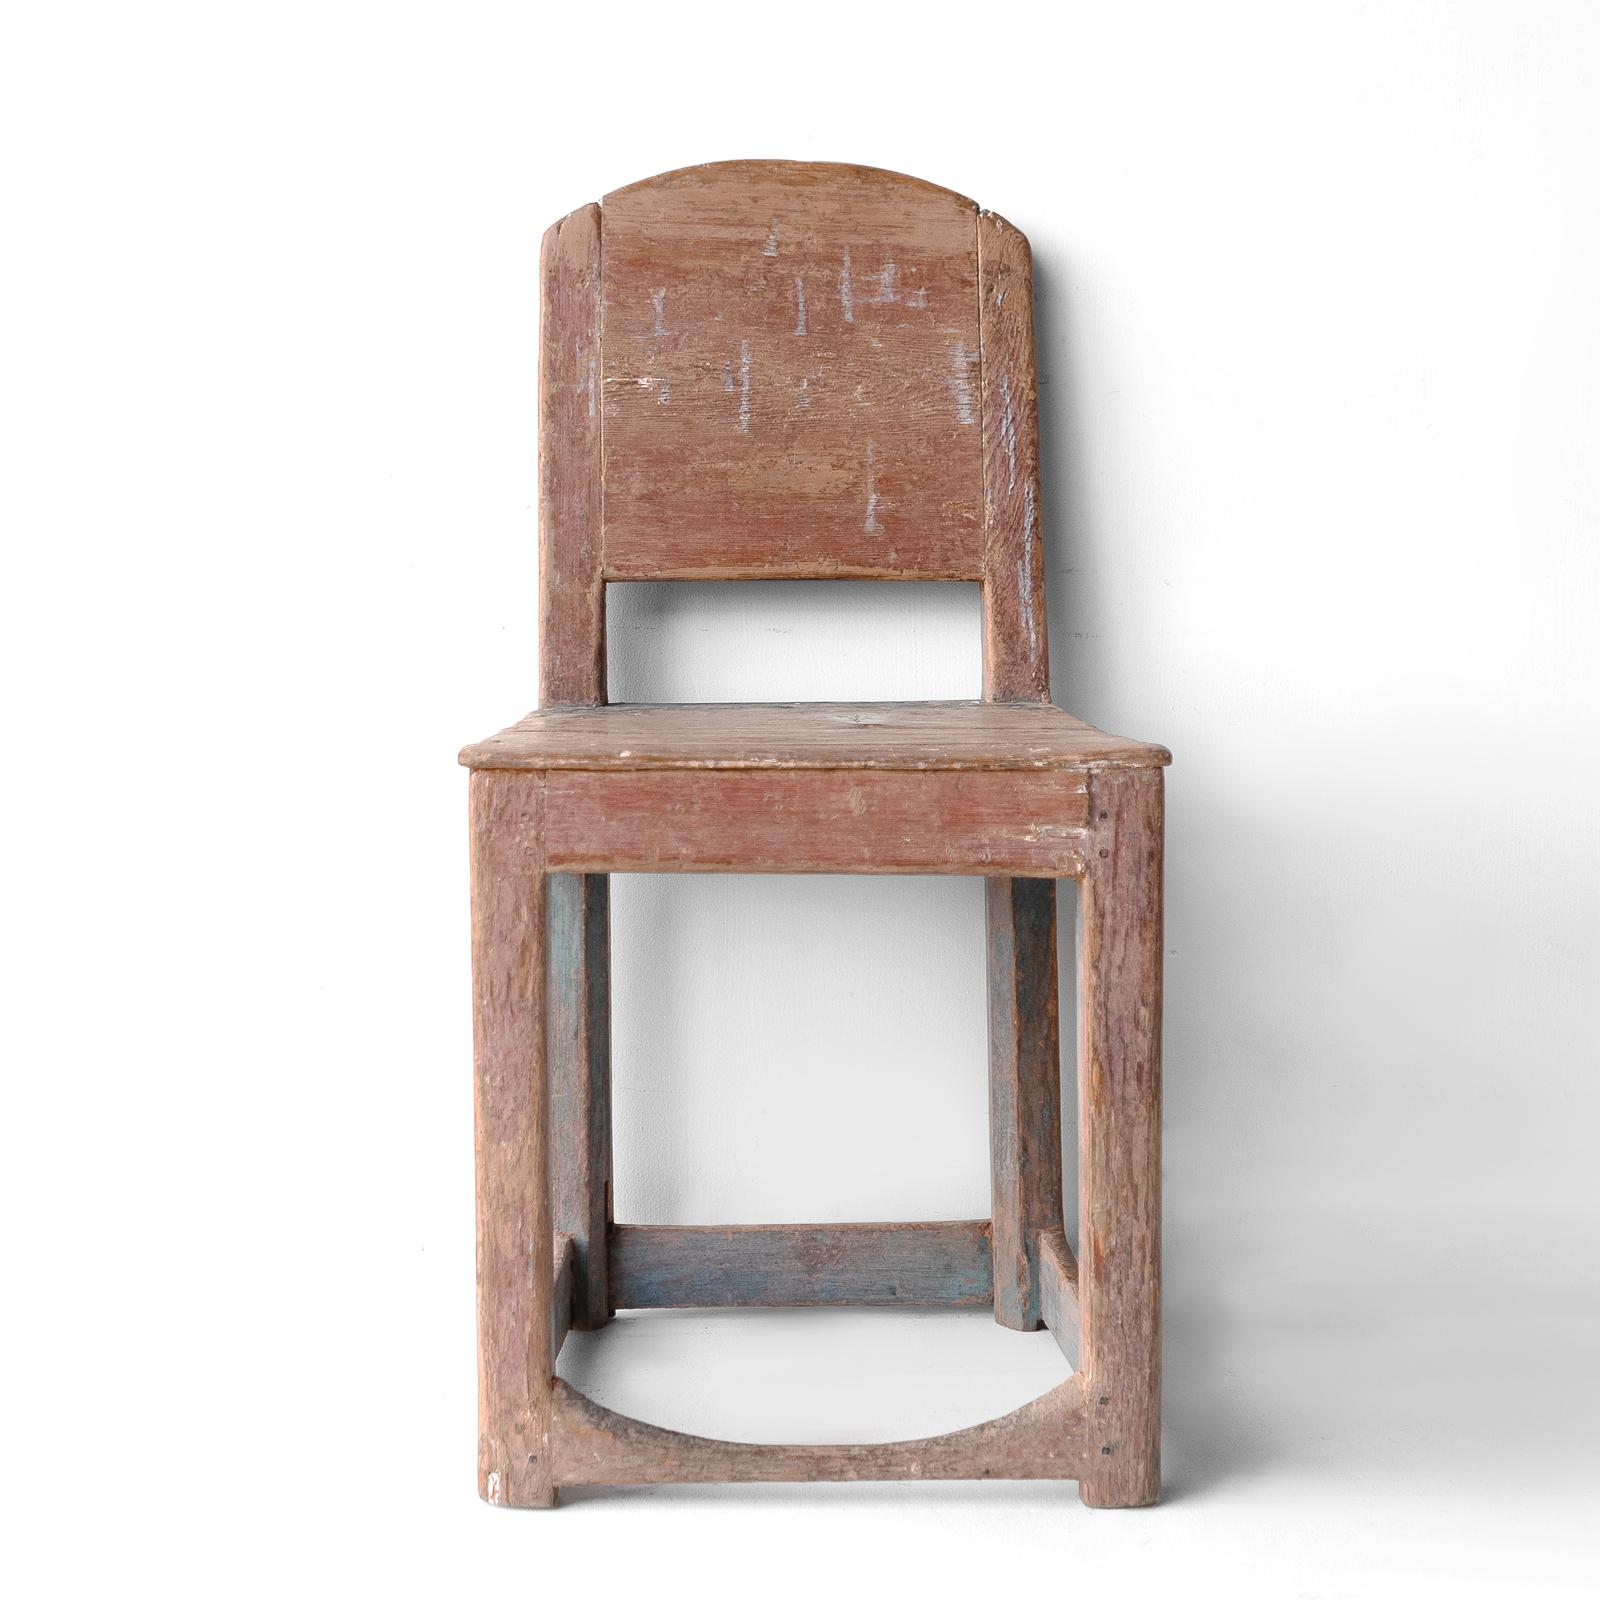 ANTIQUE SWEDISH CHAIR
A decorative and characterful chair with simple lines, a solid arched back, a solid seat and a box stretcher.

Peg joined construction made of pine with layers of original paint worn down naturally over time with muted red,